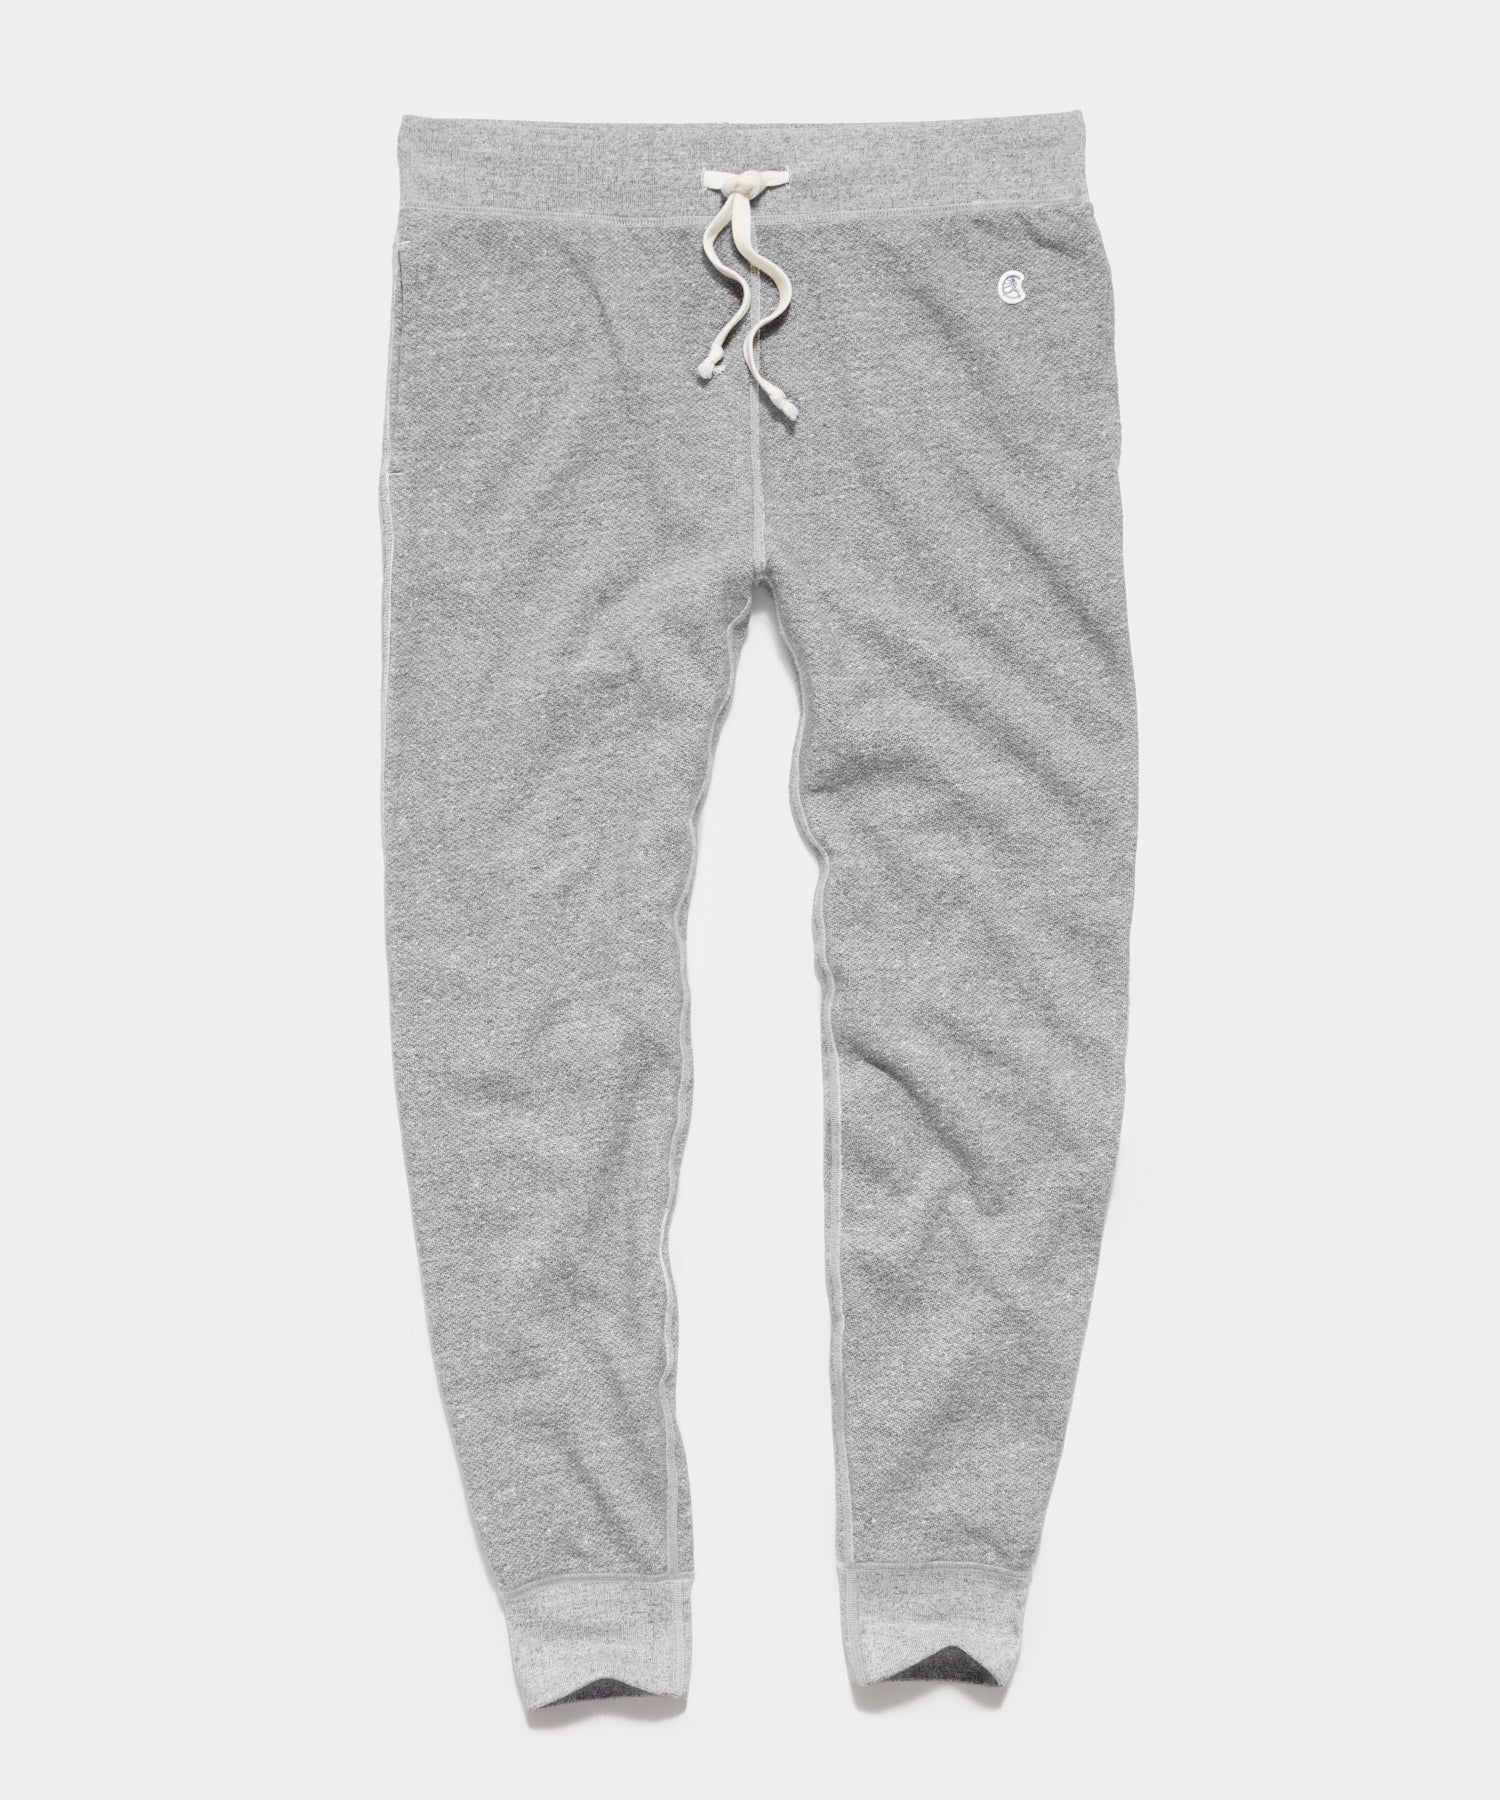 Midweight Slim Jogger Sweatpant in Antique Grey Mix